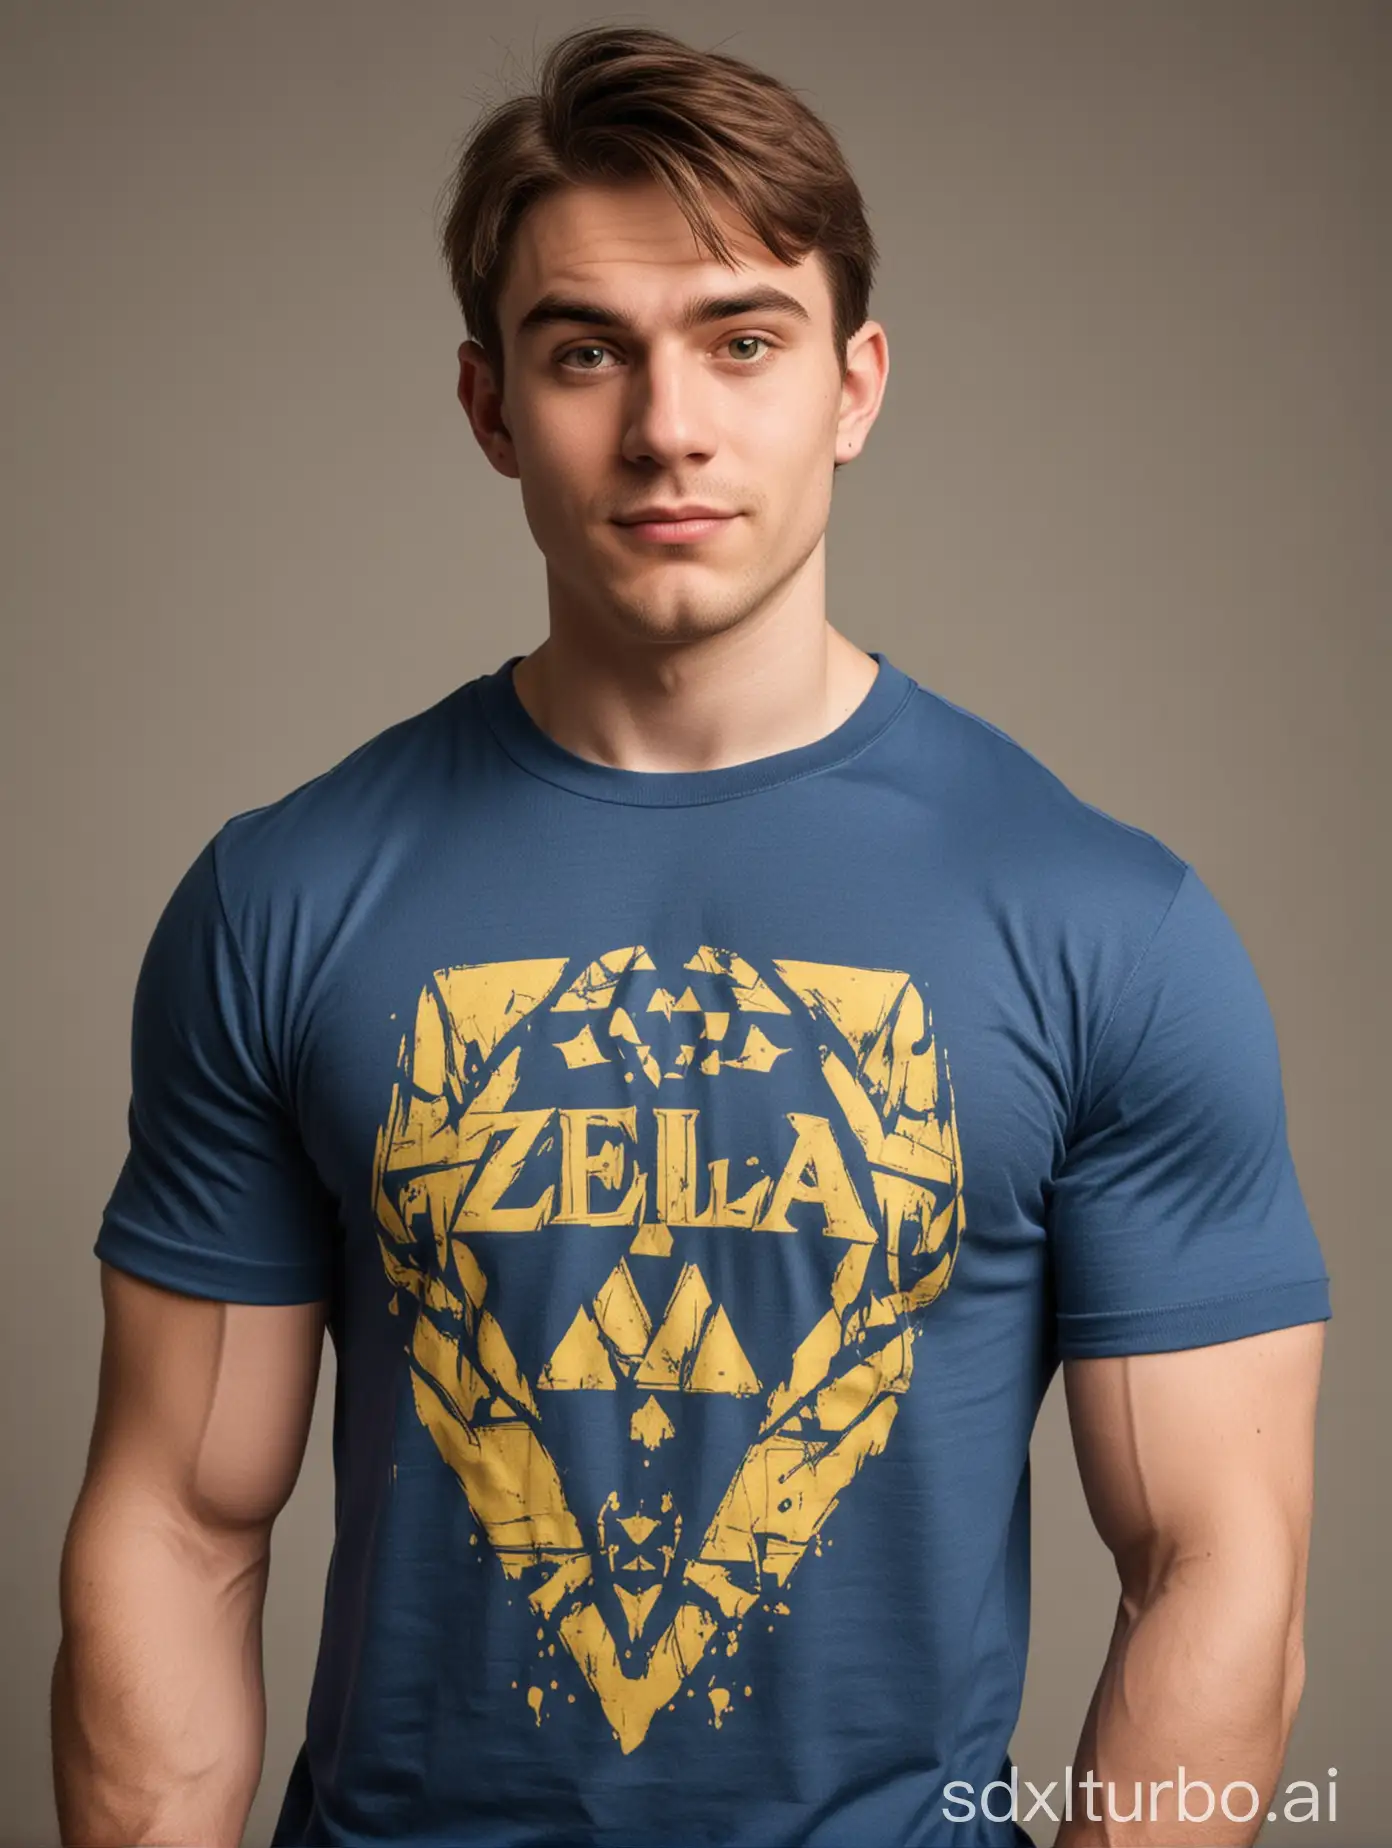 Young-Man-in-Zelda-TShirt-Displays-Wealth-and-Strength